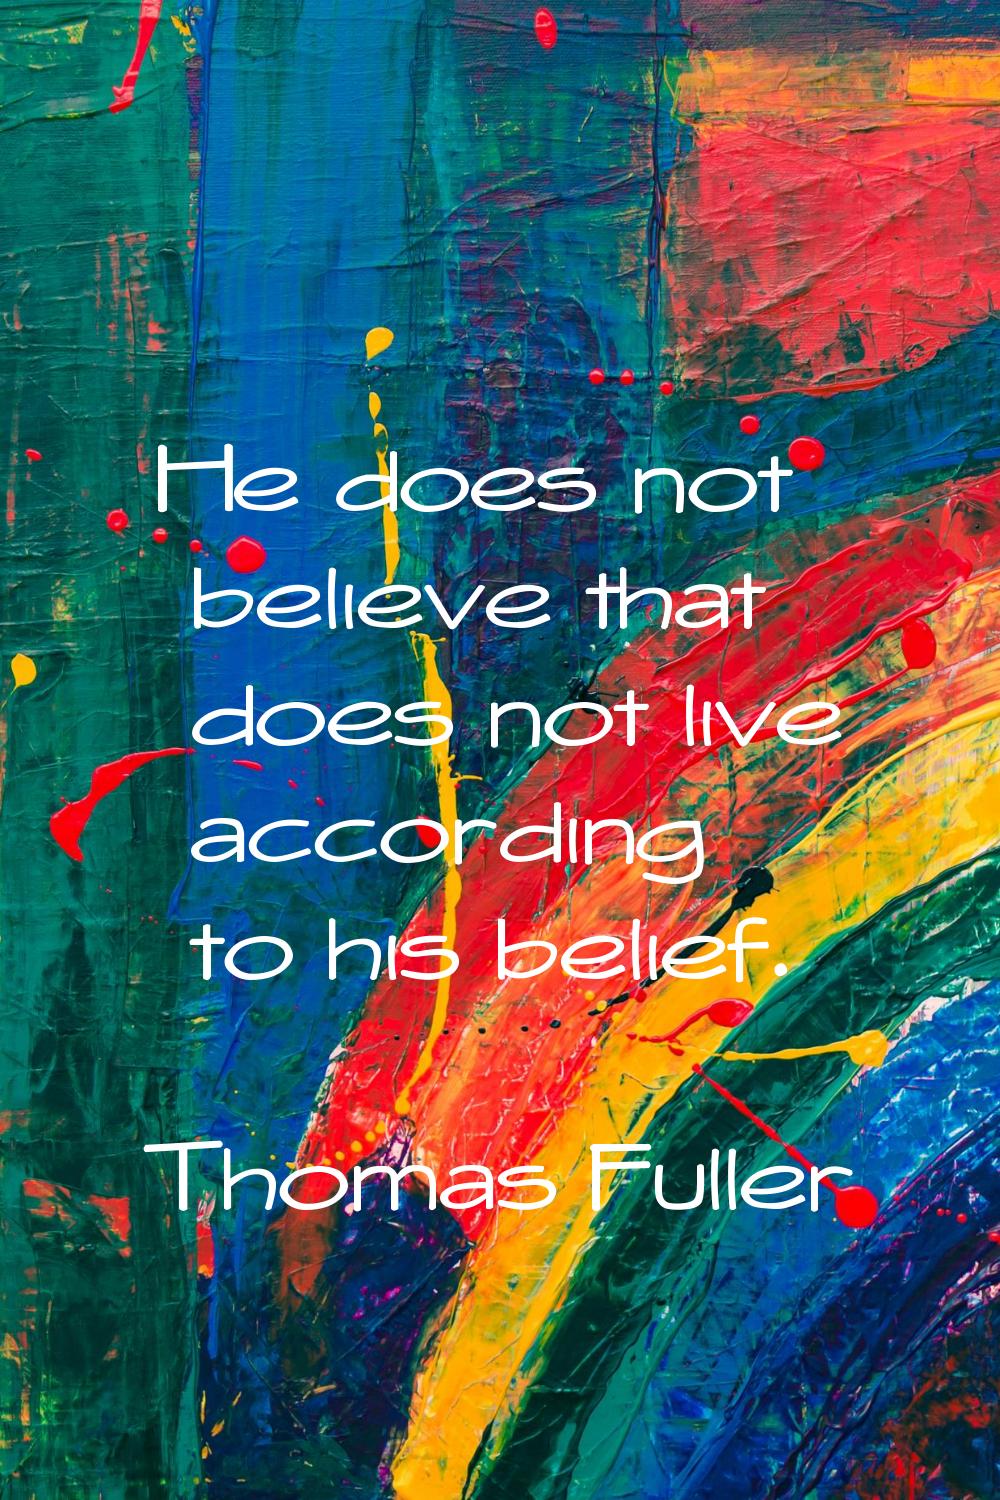 He does not believe that does not live according to his belief.